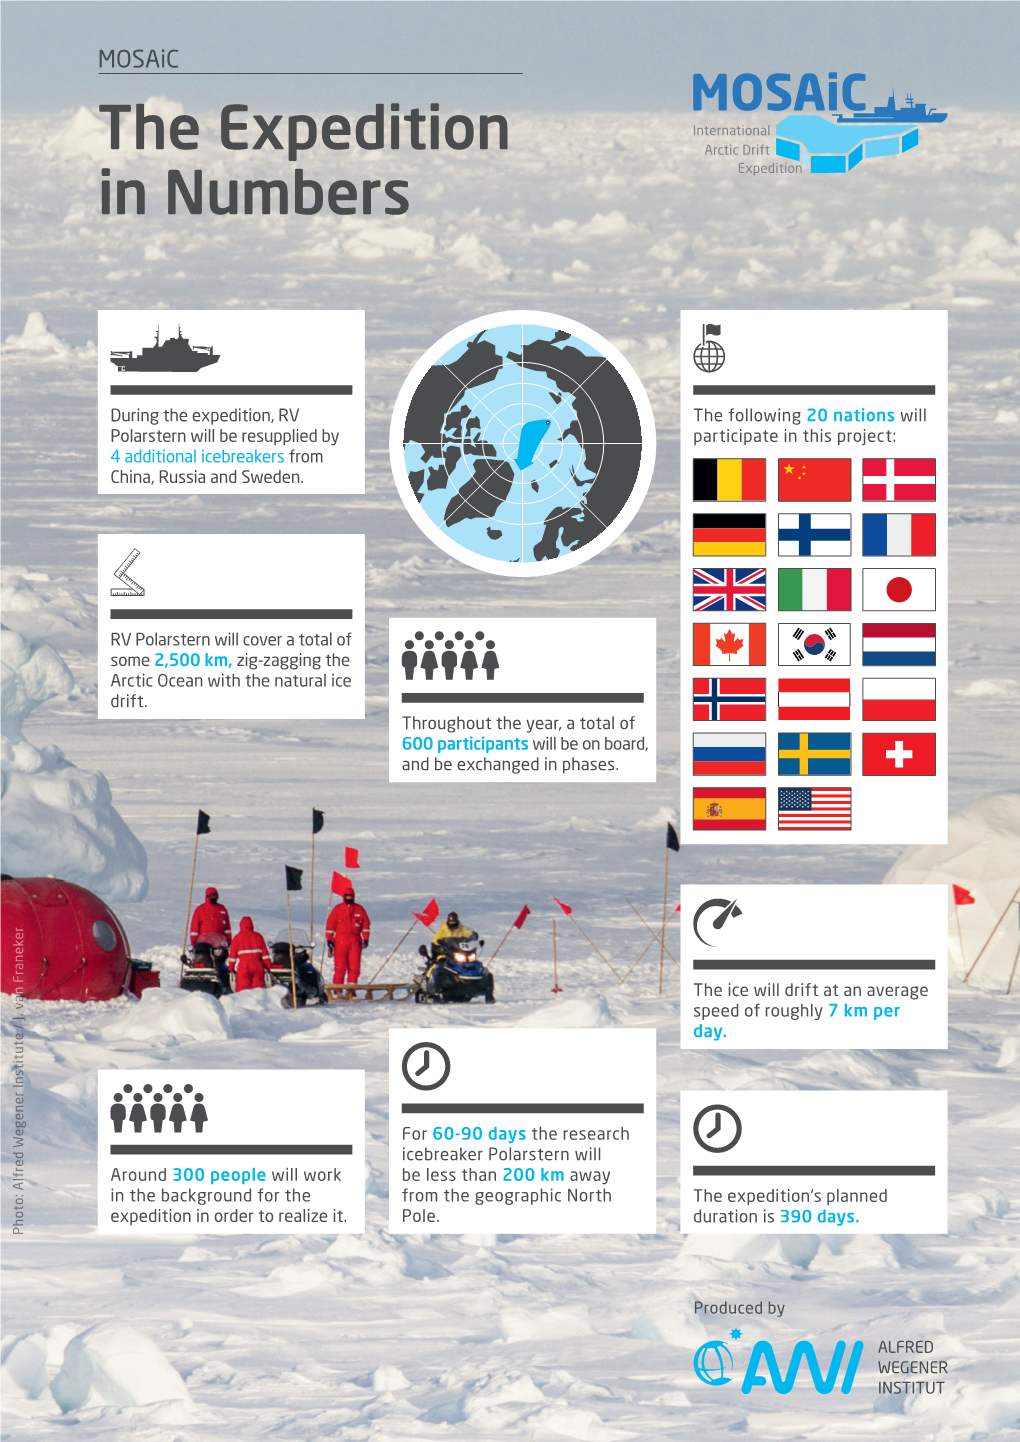 The Expedition in Numbers